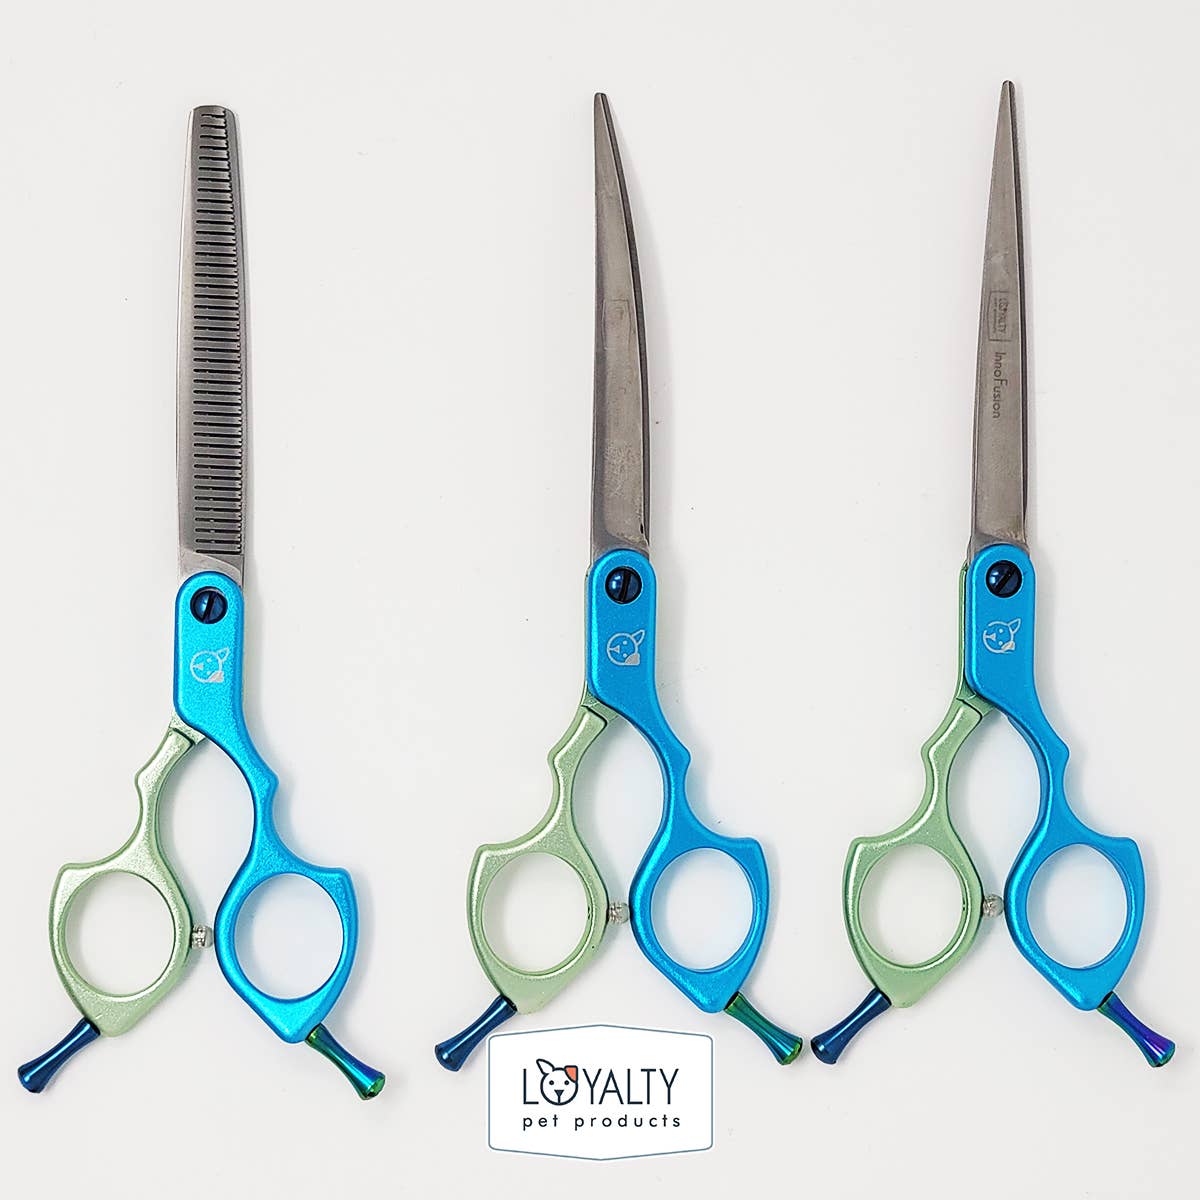 Loyalty Pet Products Serenity 4 Piece Shear Set